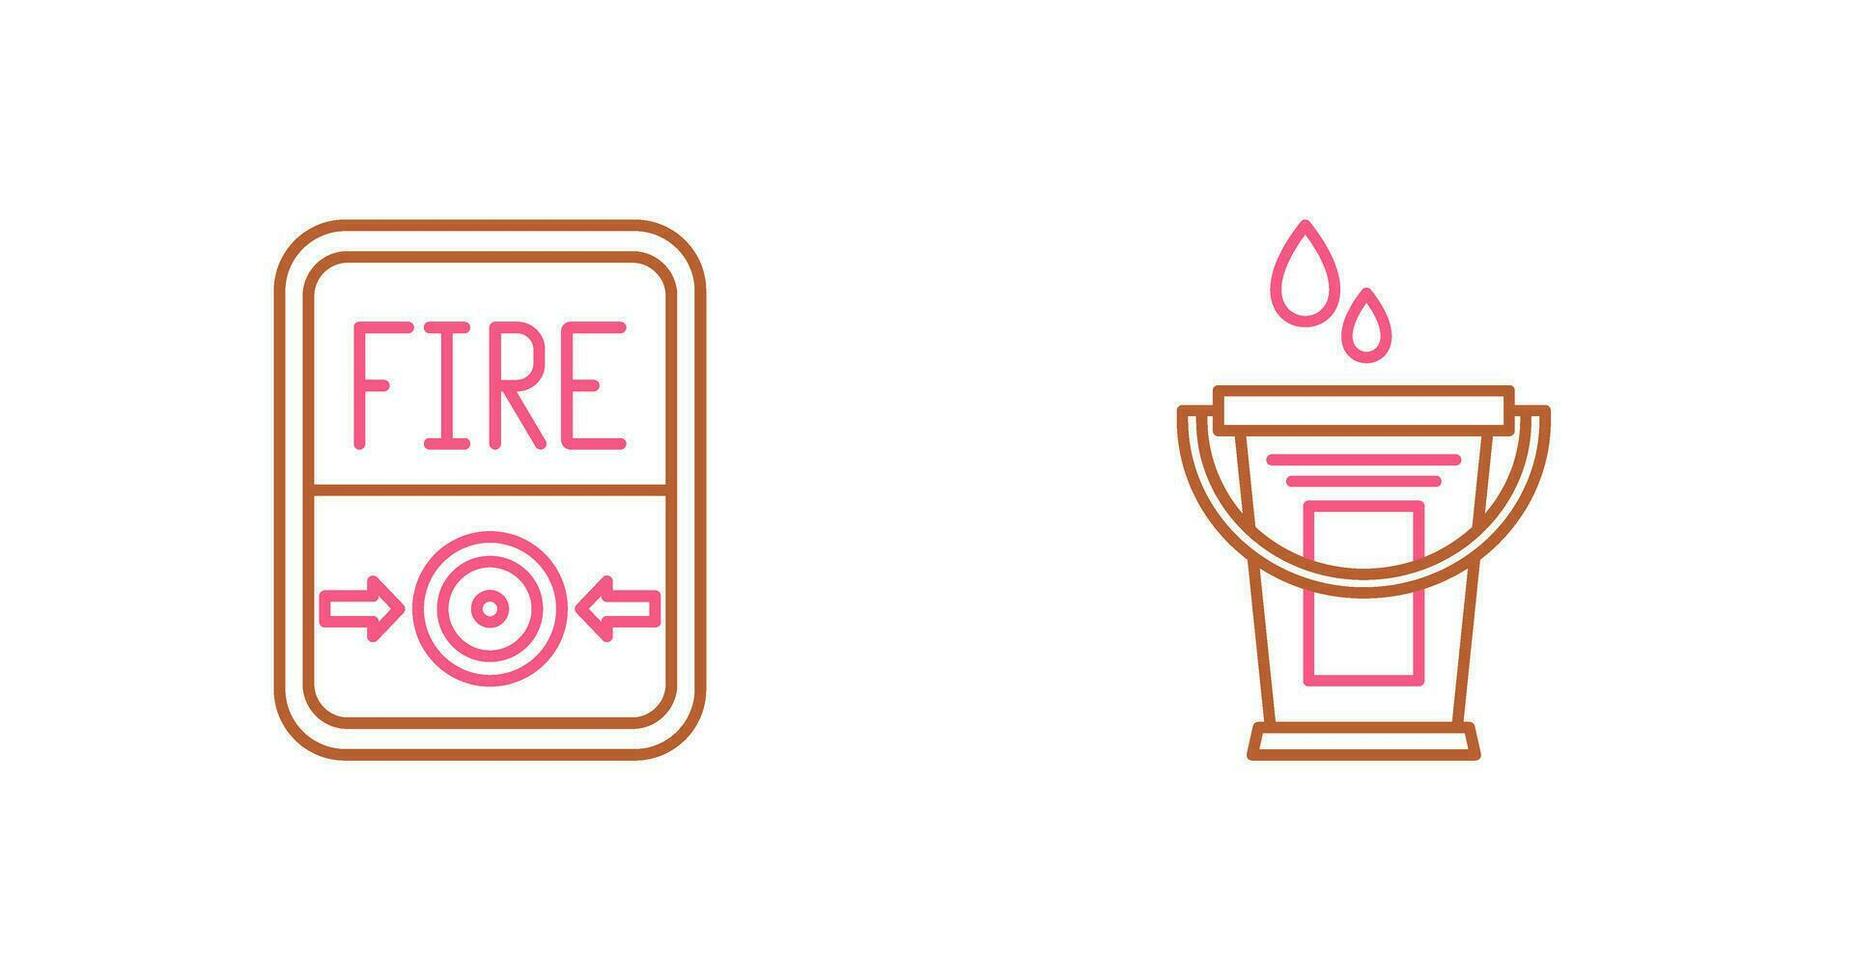 Fire Button and Water Bucket Icon vector